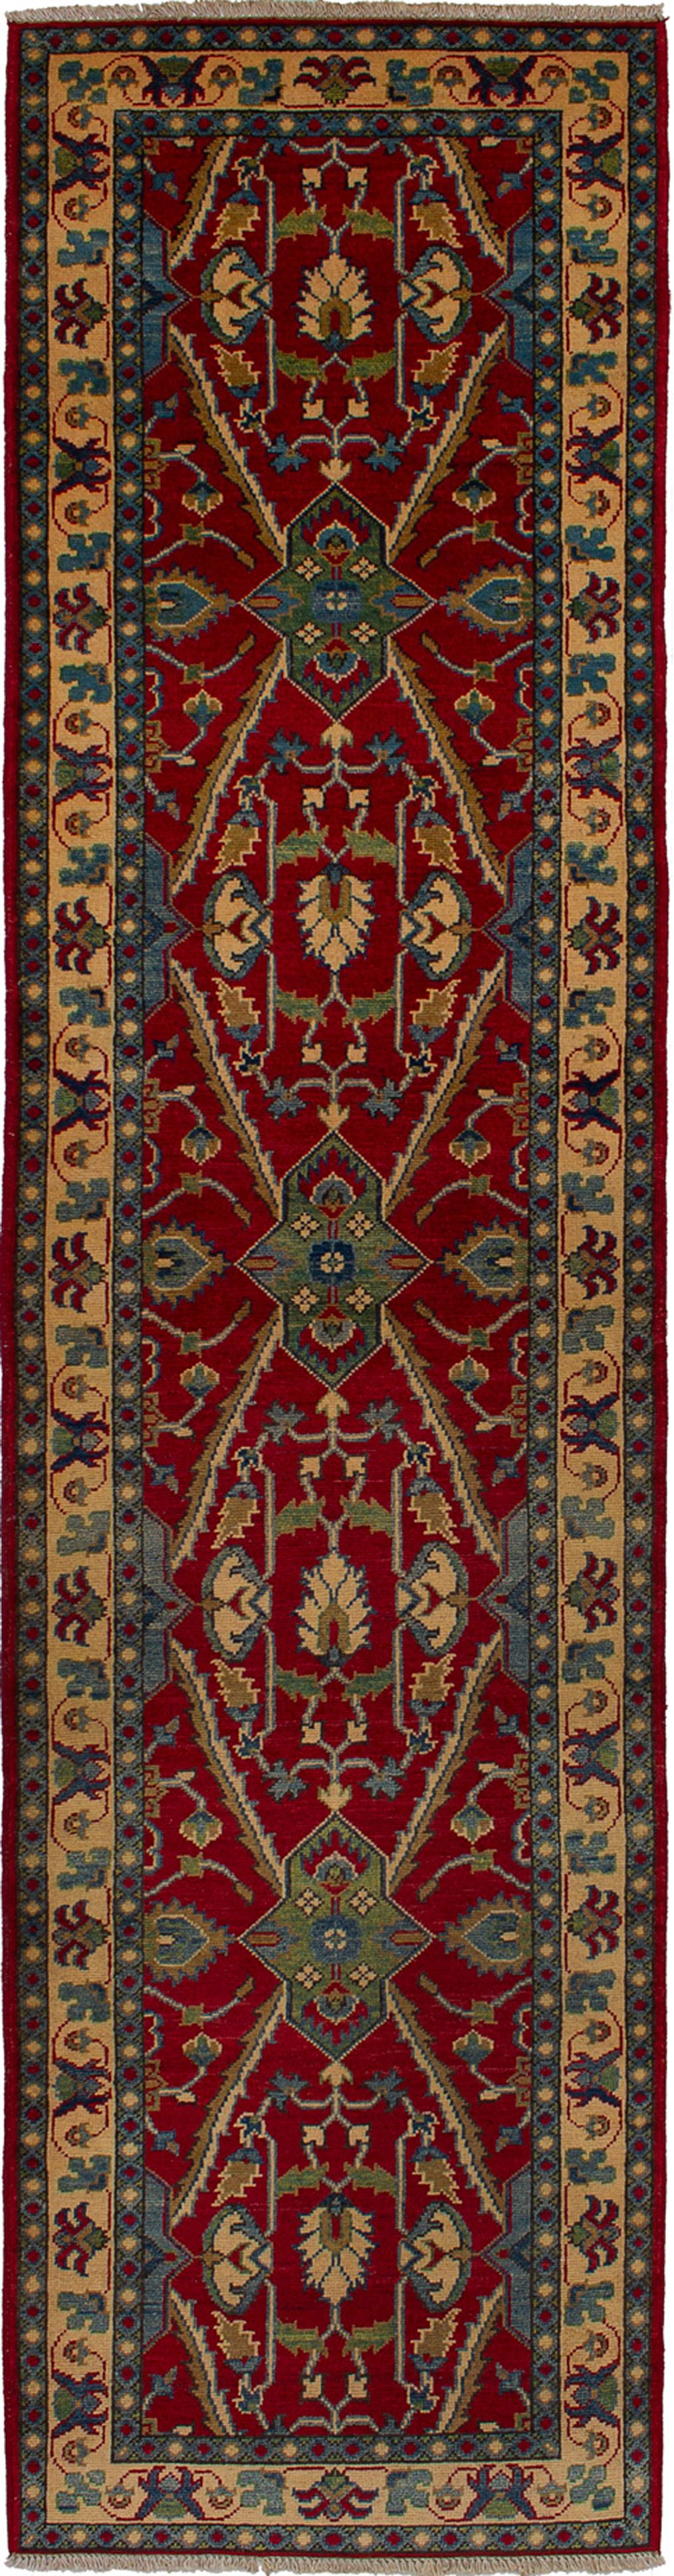 Hand-knotted Finest Gazni Red Wool Rug 2'4" x 9'7" Size: 2'4" x 9'7"  